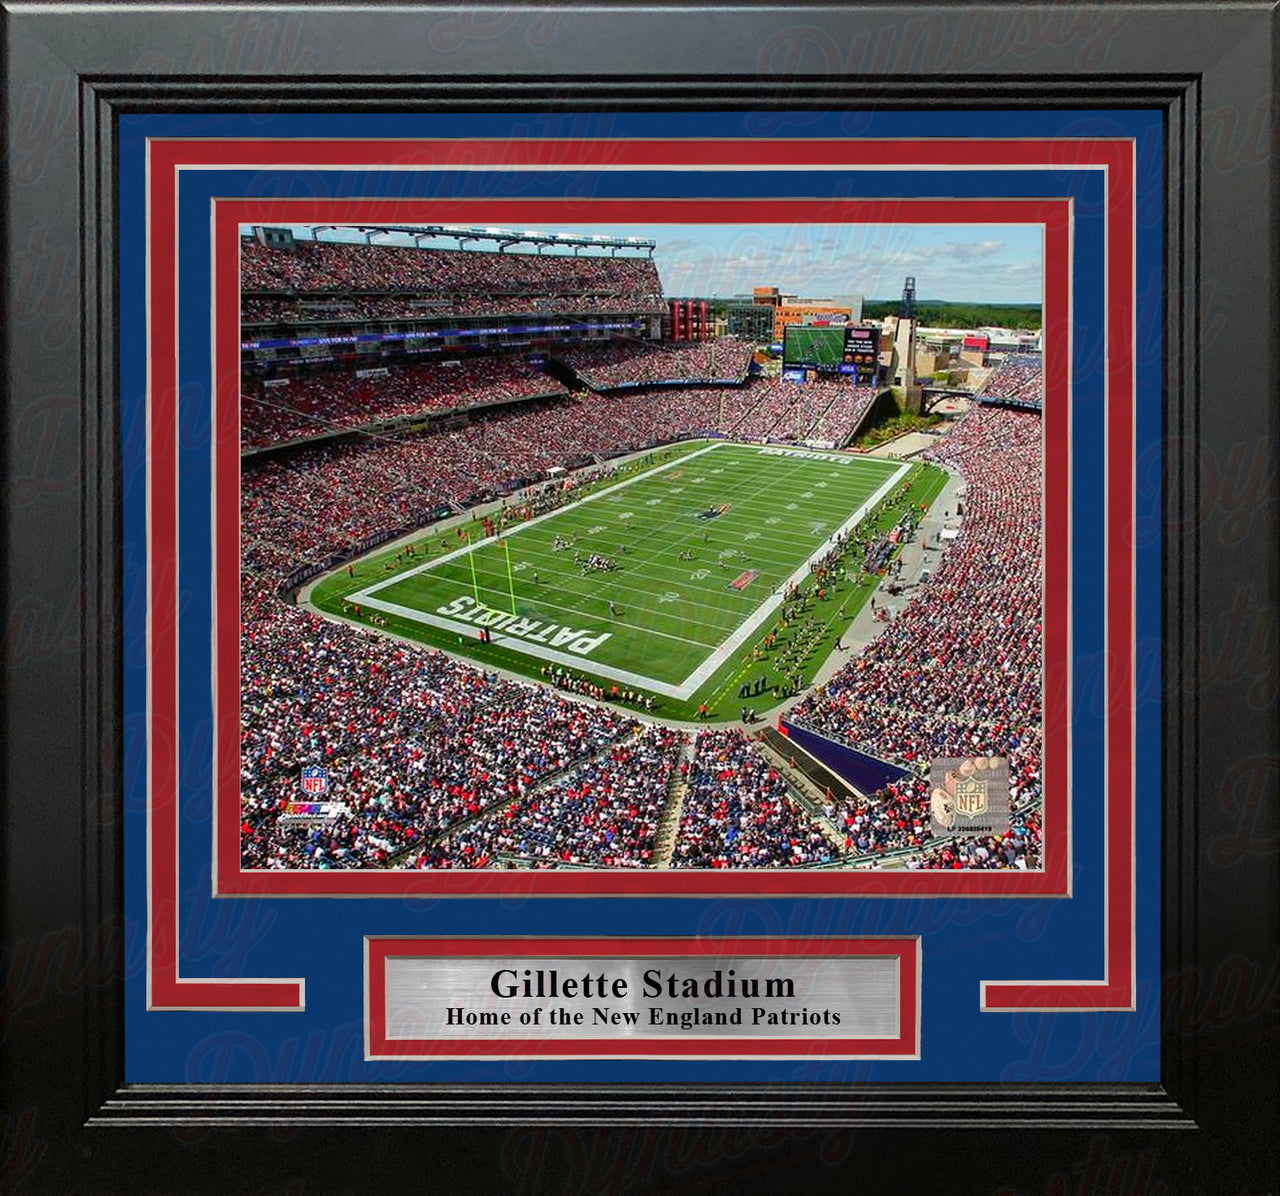 New England Patriots Gillette Stadium NFL Football 8" x 10" Framed and Matted Photo - Dynasty Sports & Framing 